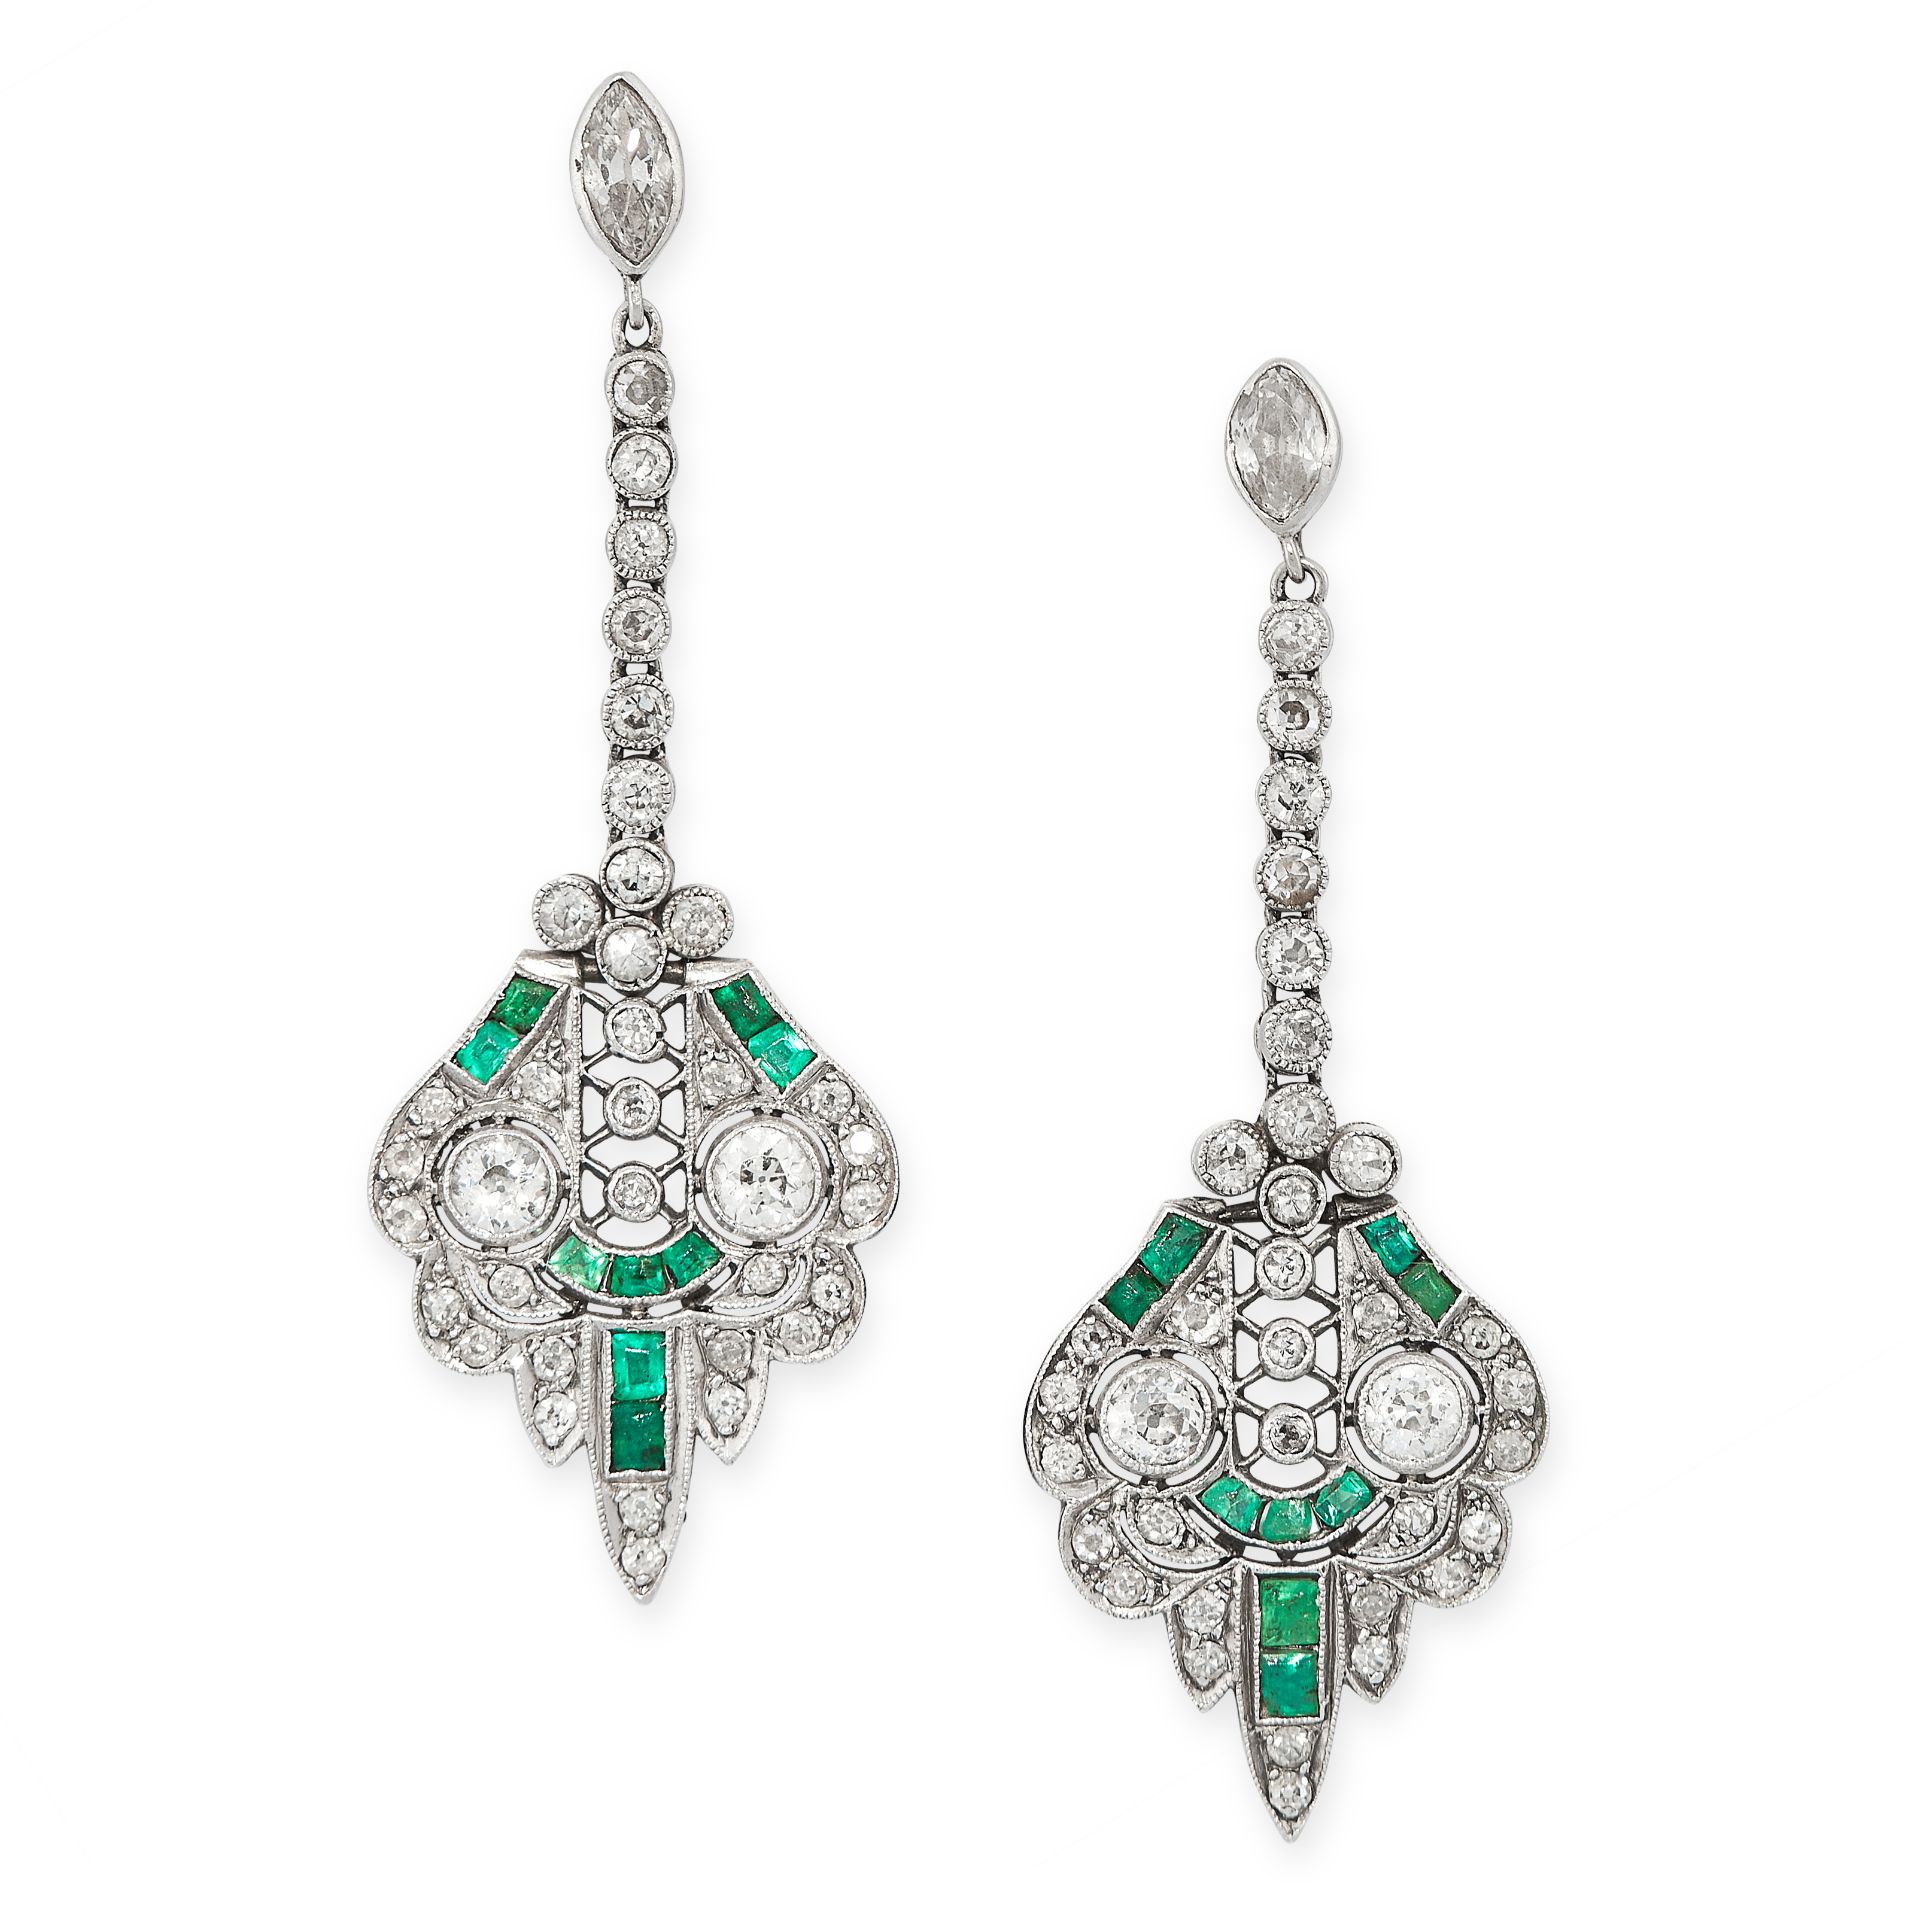 A PAIR OF EMERALD AND DIAMOND EARRINGS in platinum, the openwork bodies set with old cut and